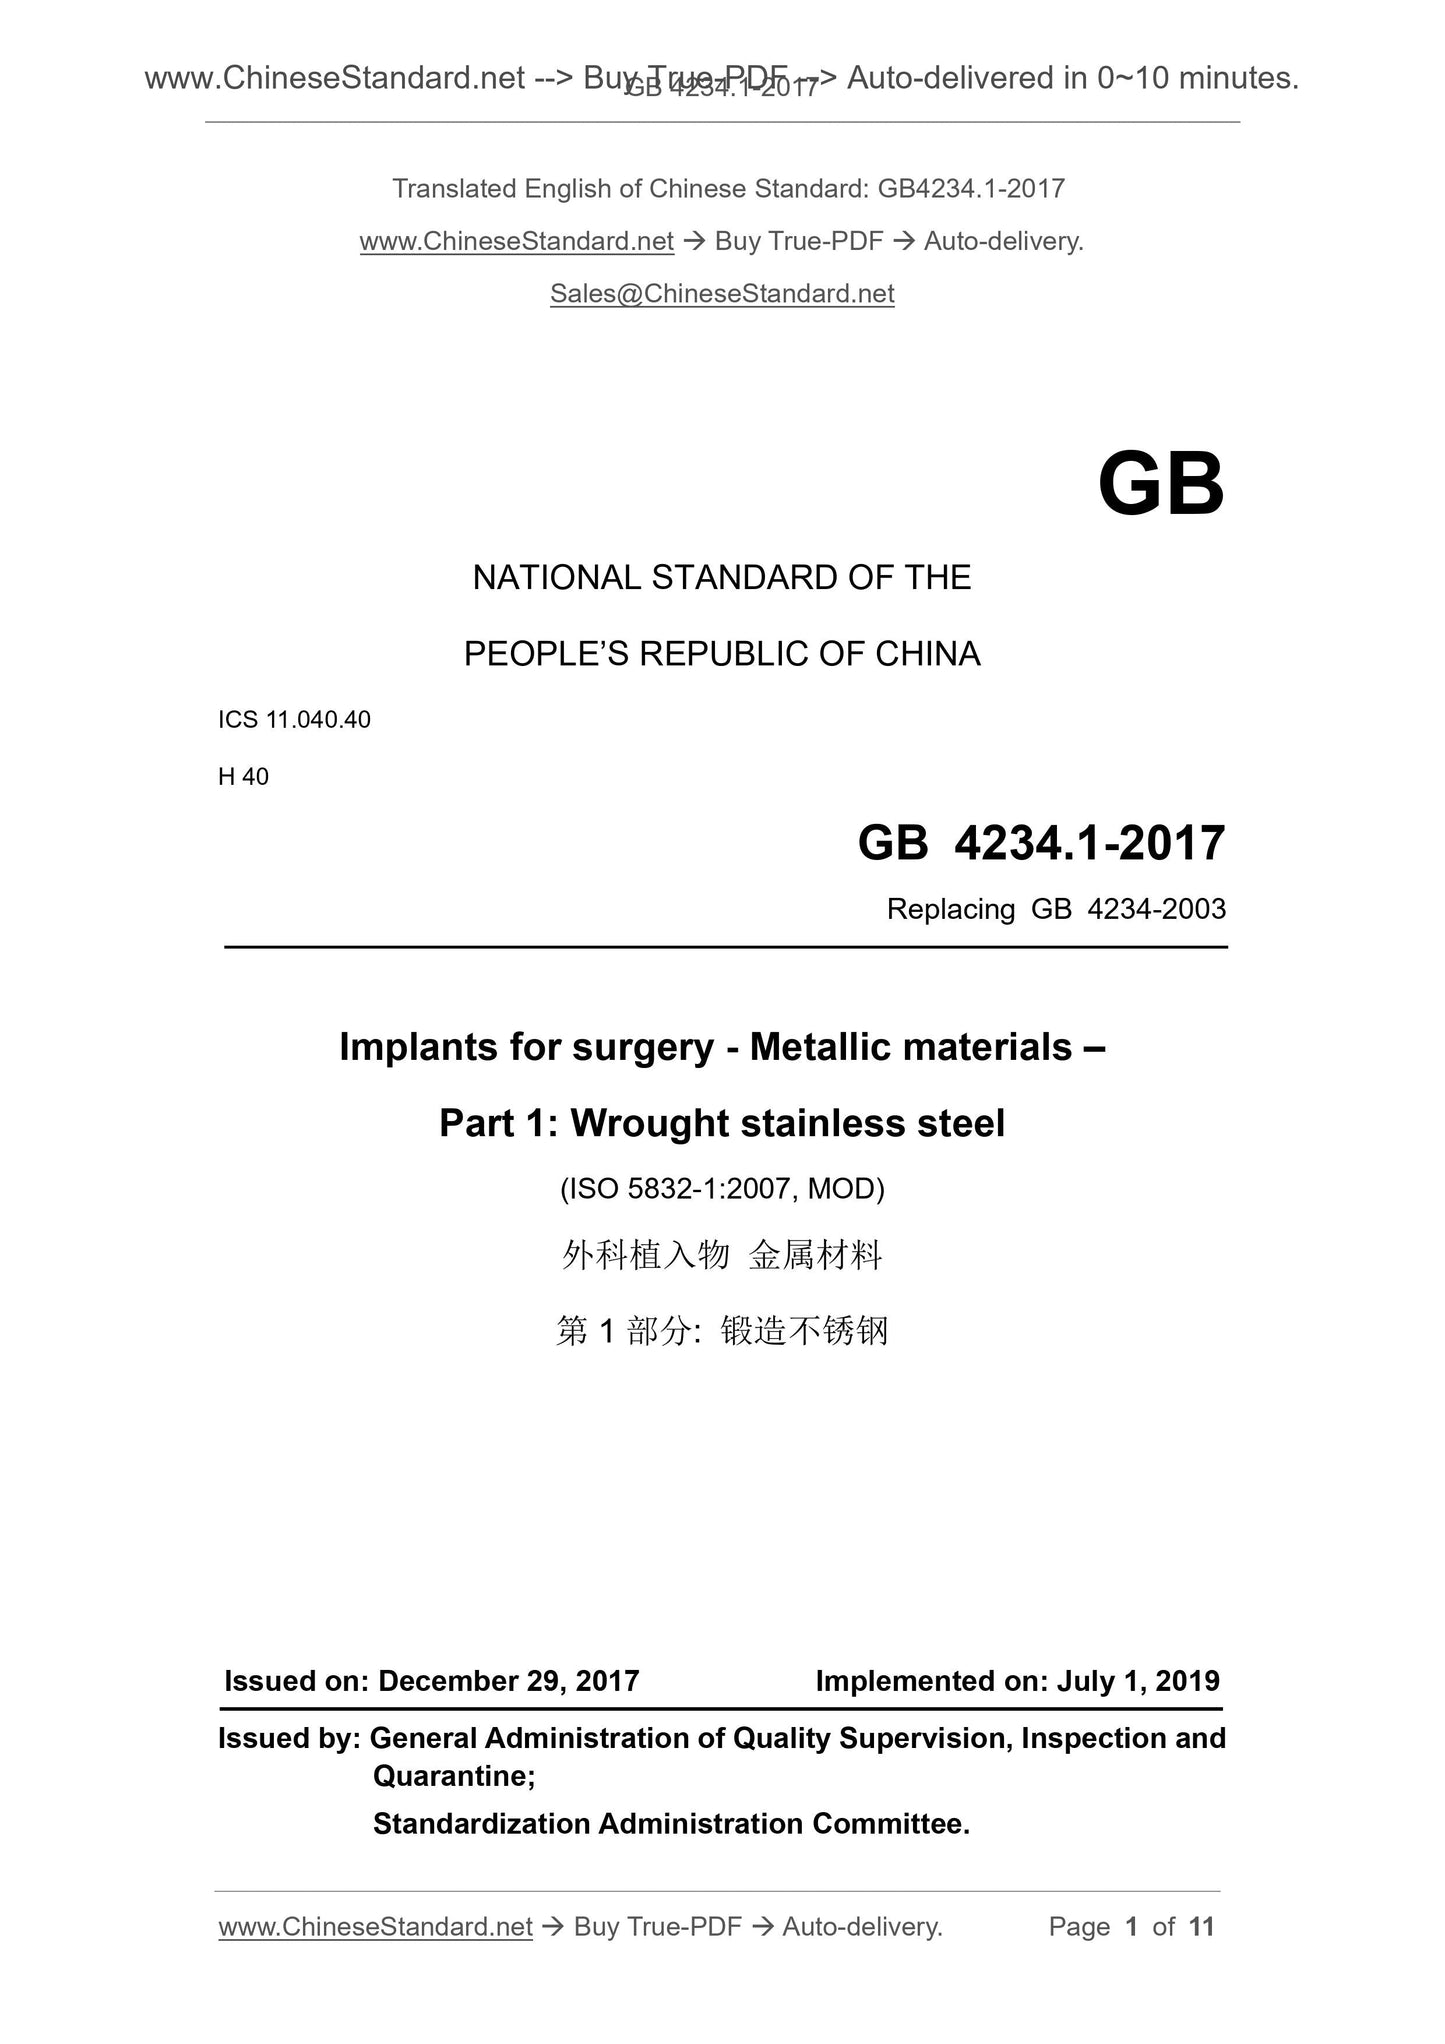 GB 4234.1-2017 Page 1